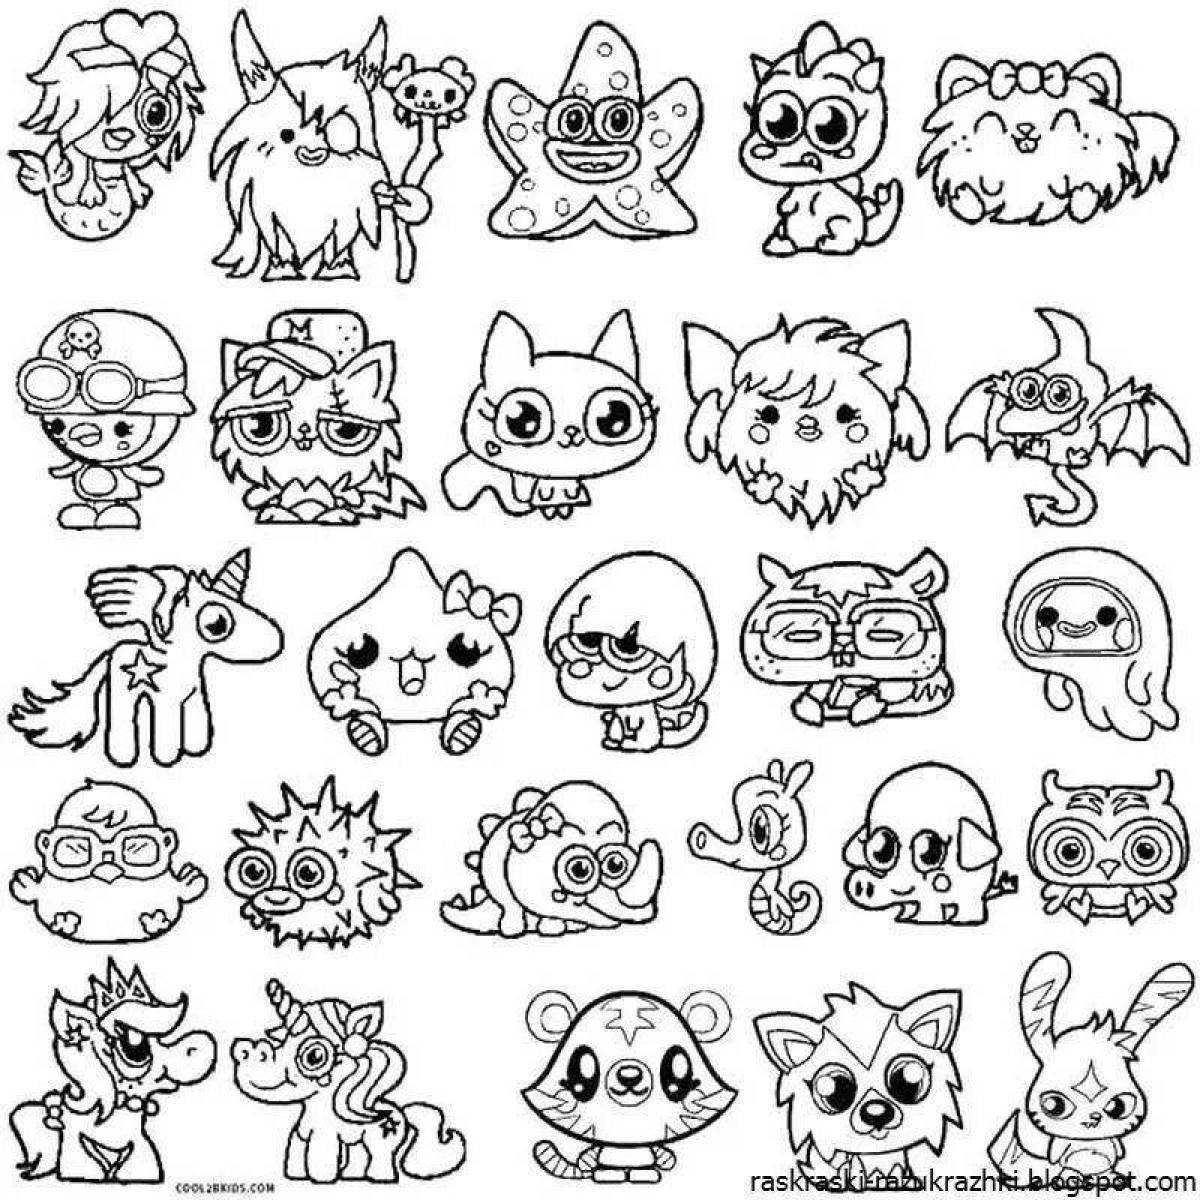 Charming coloring cute stickers